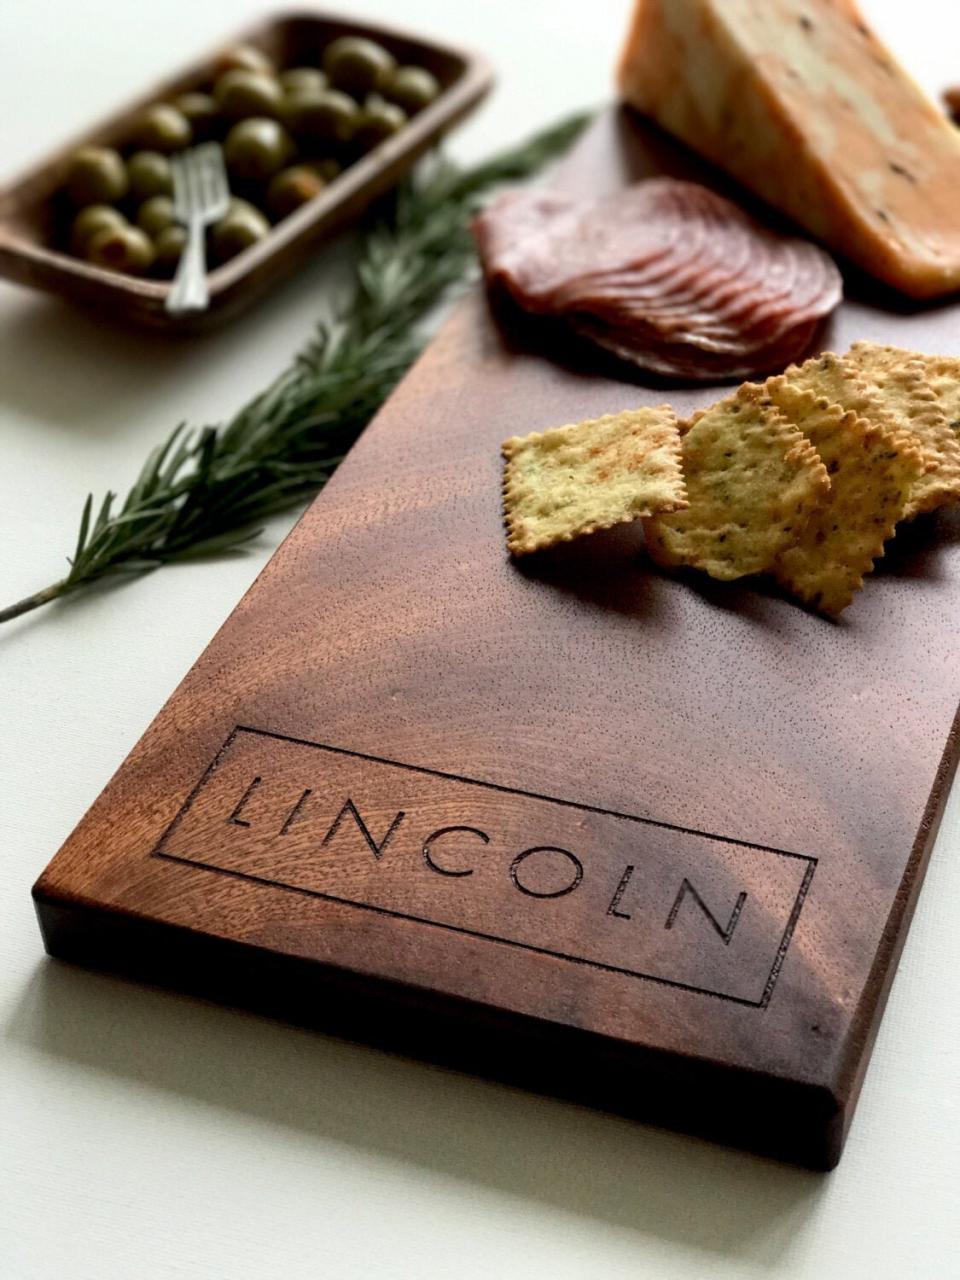 Select the wood species and name for this personalized charcuterie board. A great gift for the foodie in your life.&nbsp;<a href="https://fave.co/2TmDX9Z" target="_blank" rel="noopener noreferrer">Find it starting at $47 on Etsy.</a>